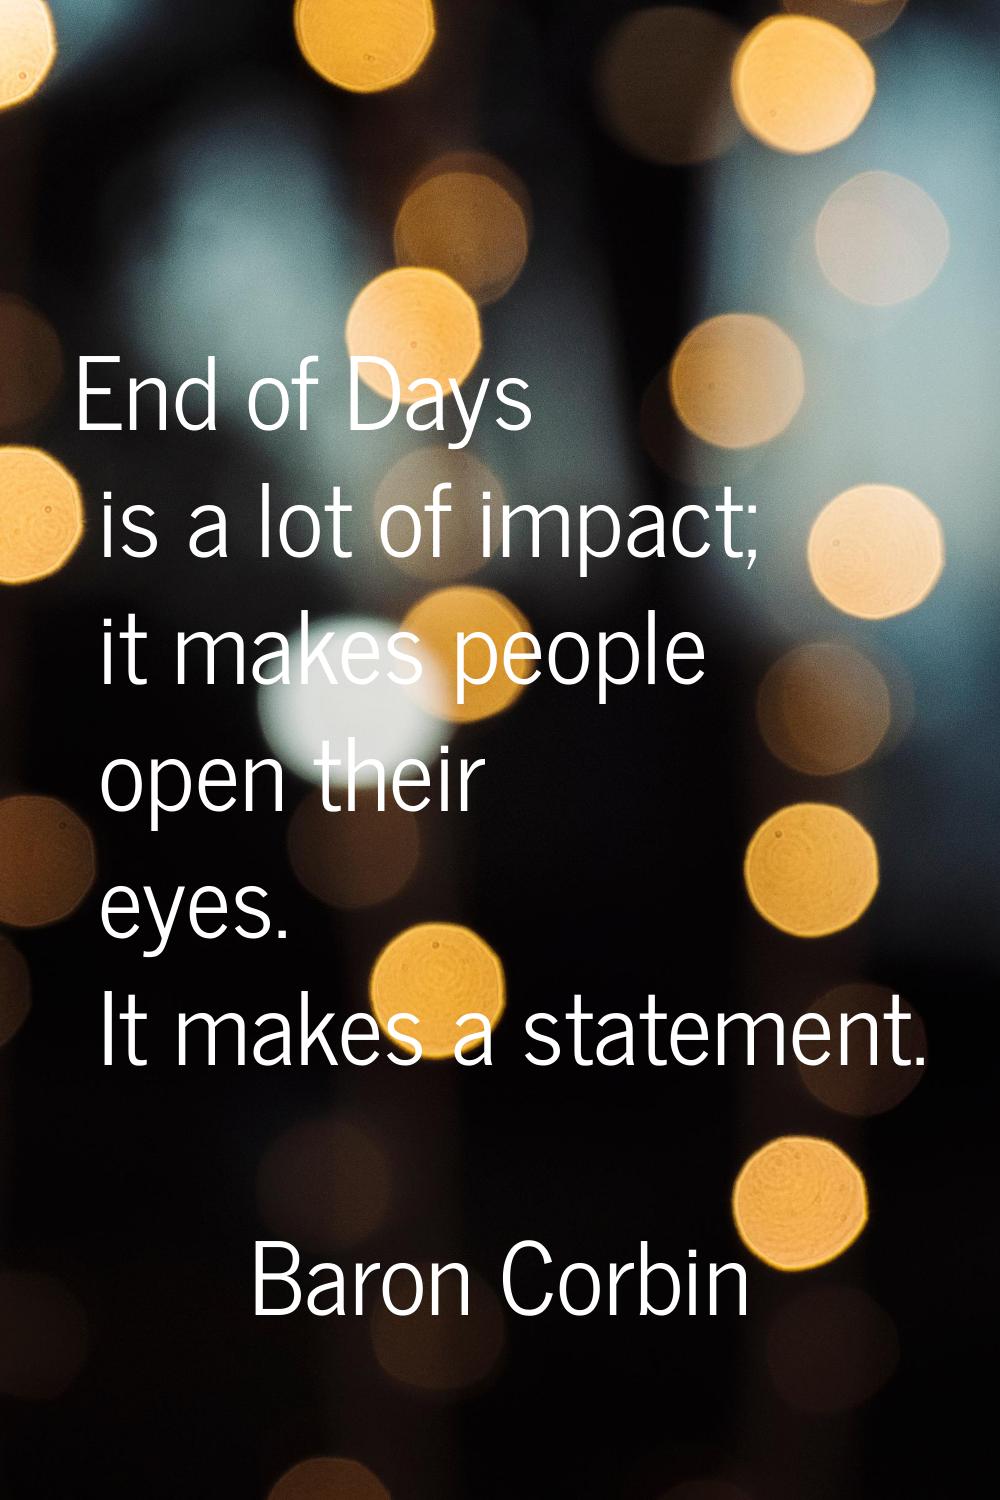 End of Days is a lot of impact; it makes people open their eyes. It makes a statement.